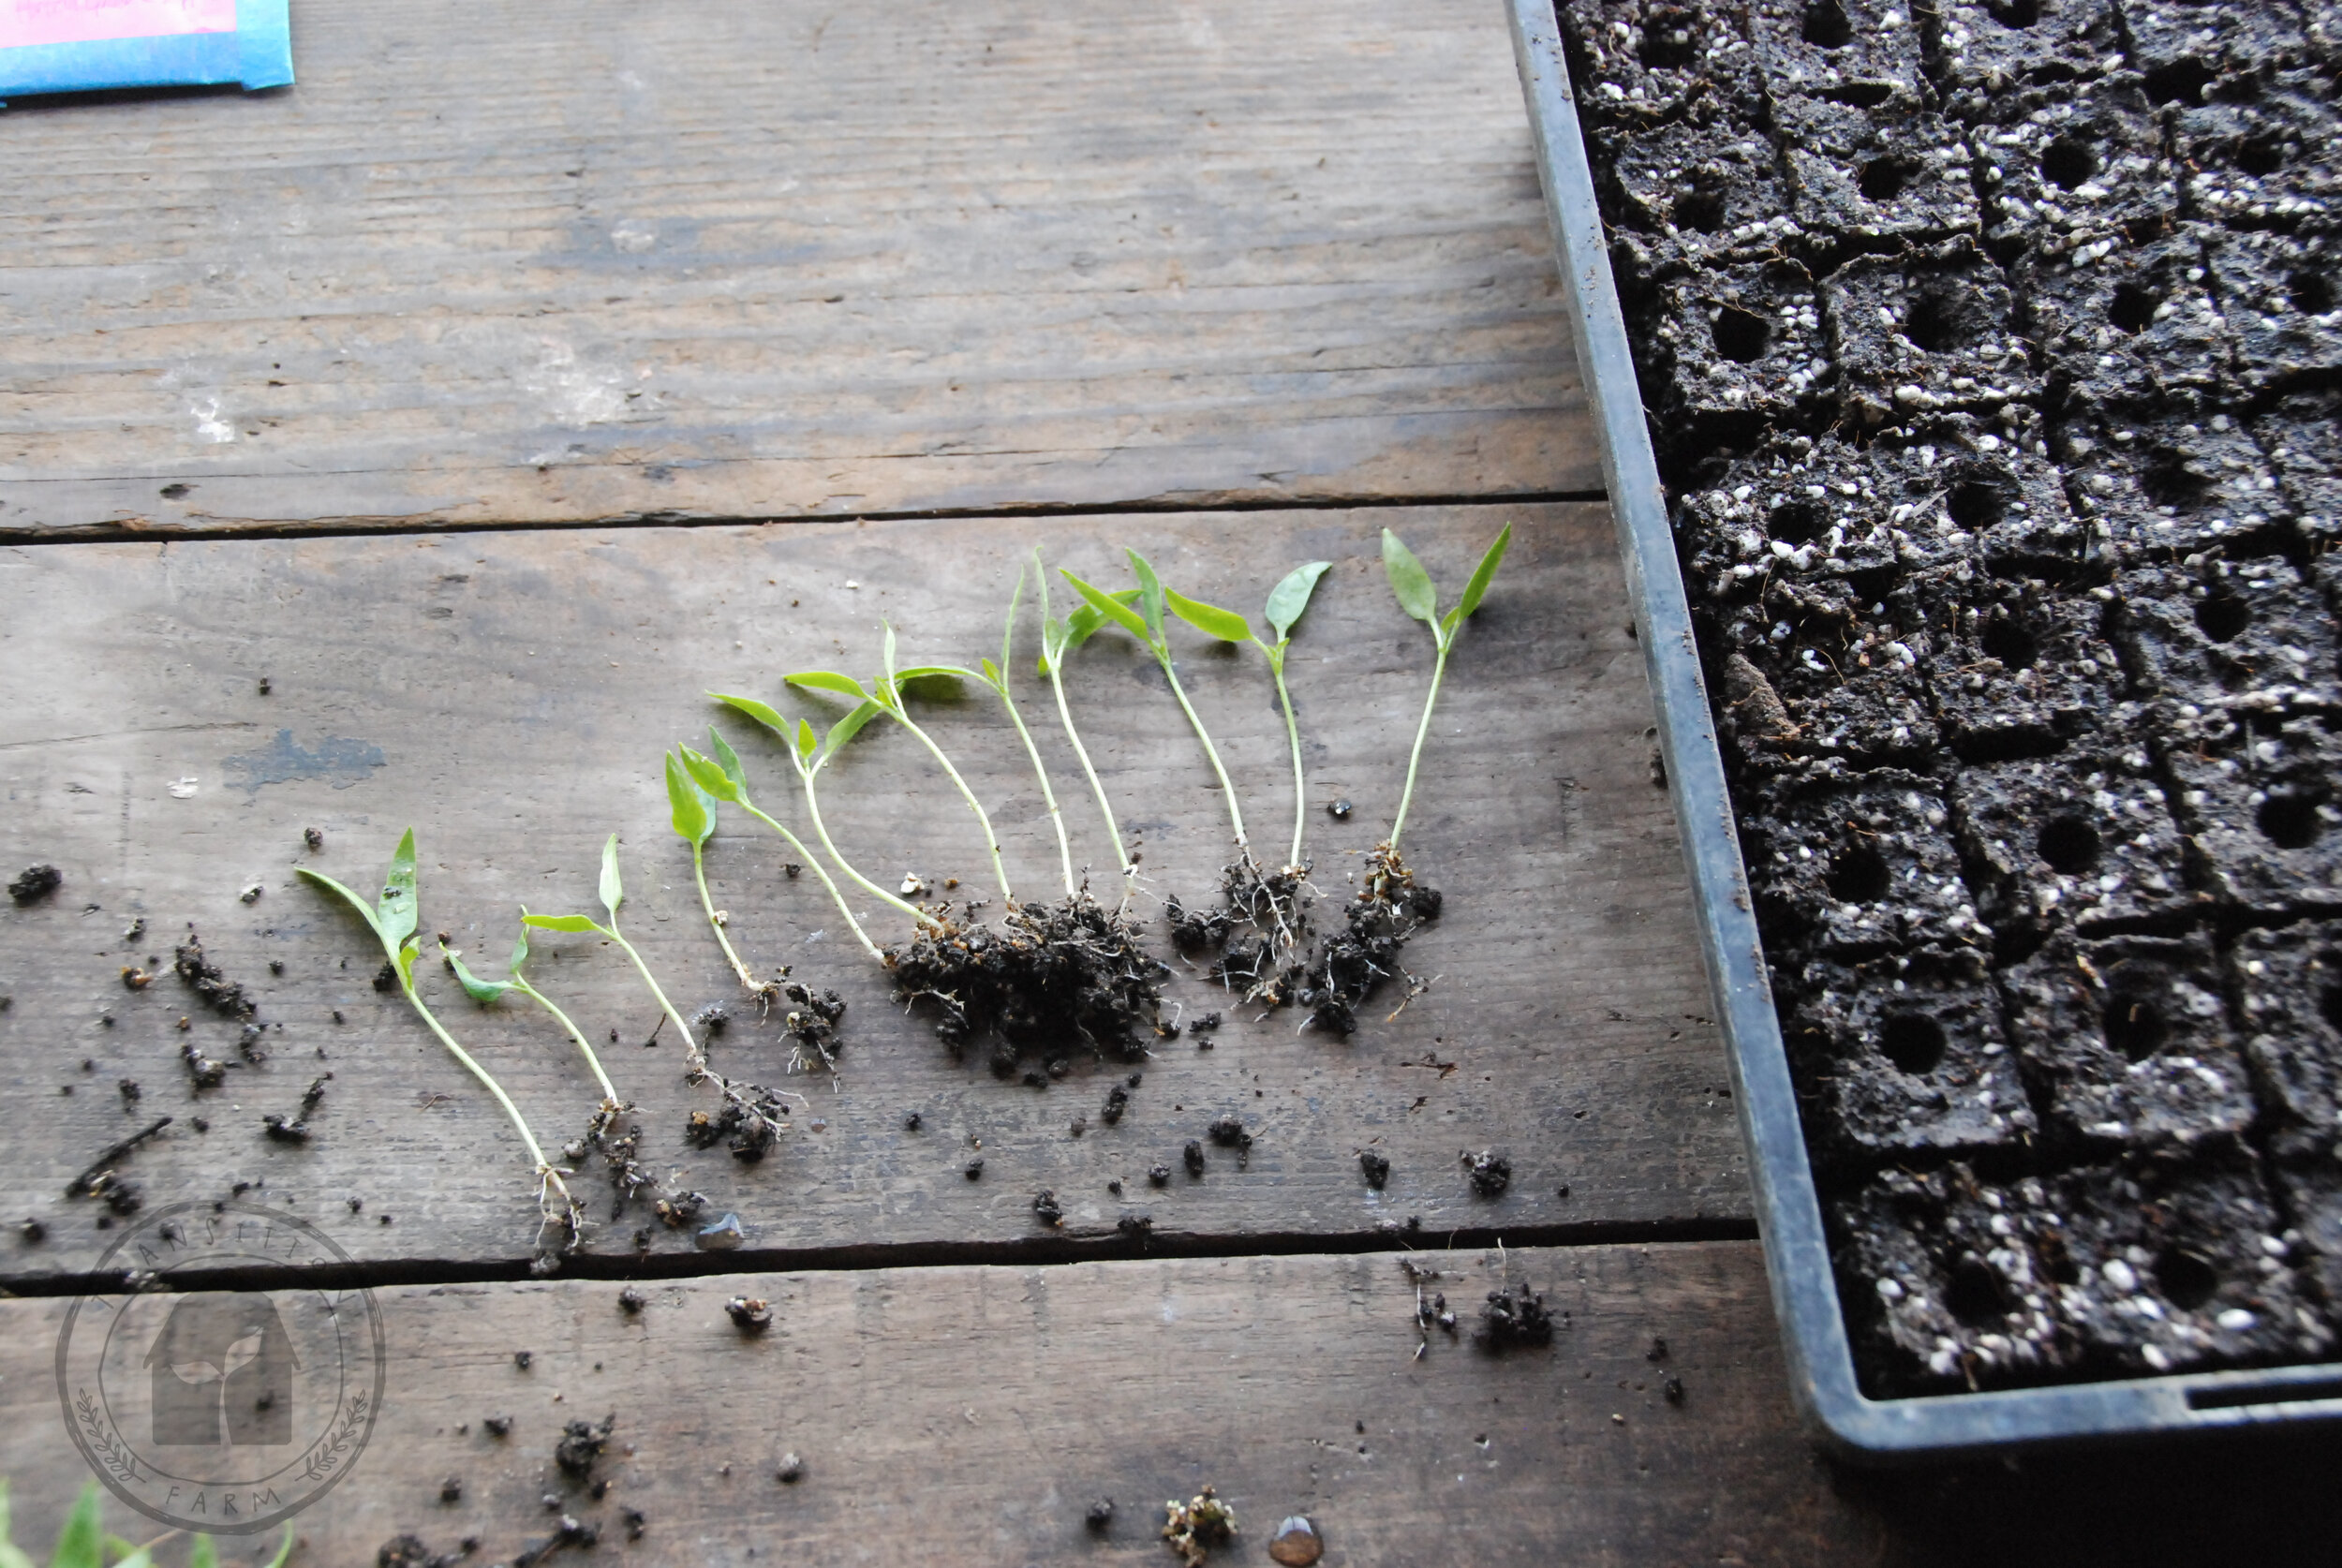   CHOOSE THE STRONGEST SEEDLINGS - We prick out several at once, choosing the strongest, straightest ones with the thickest stems.  